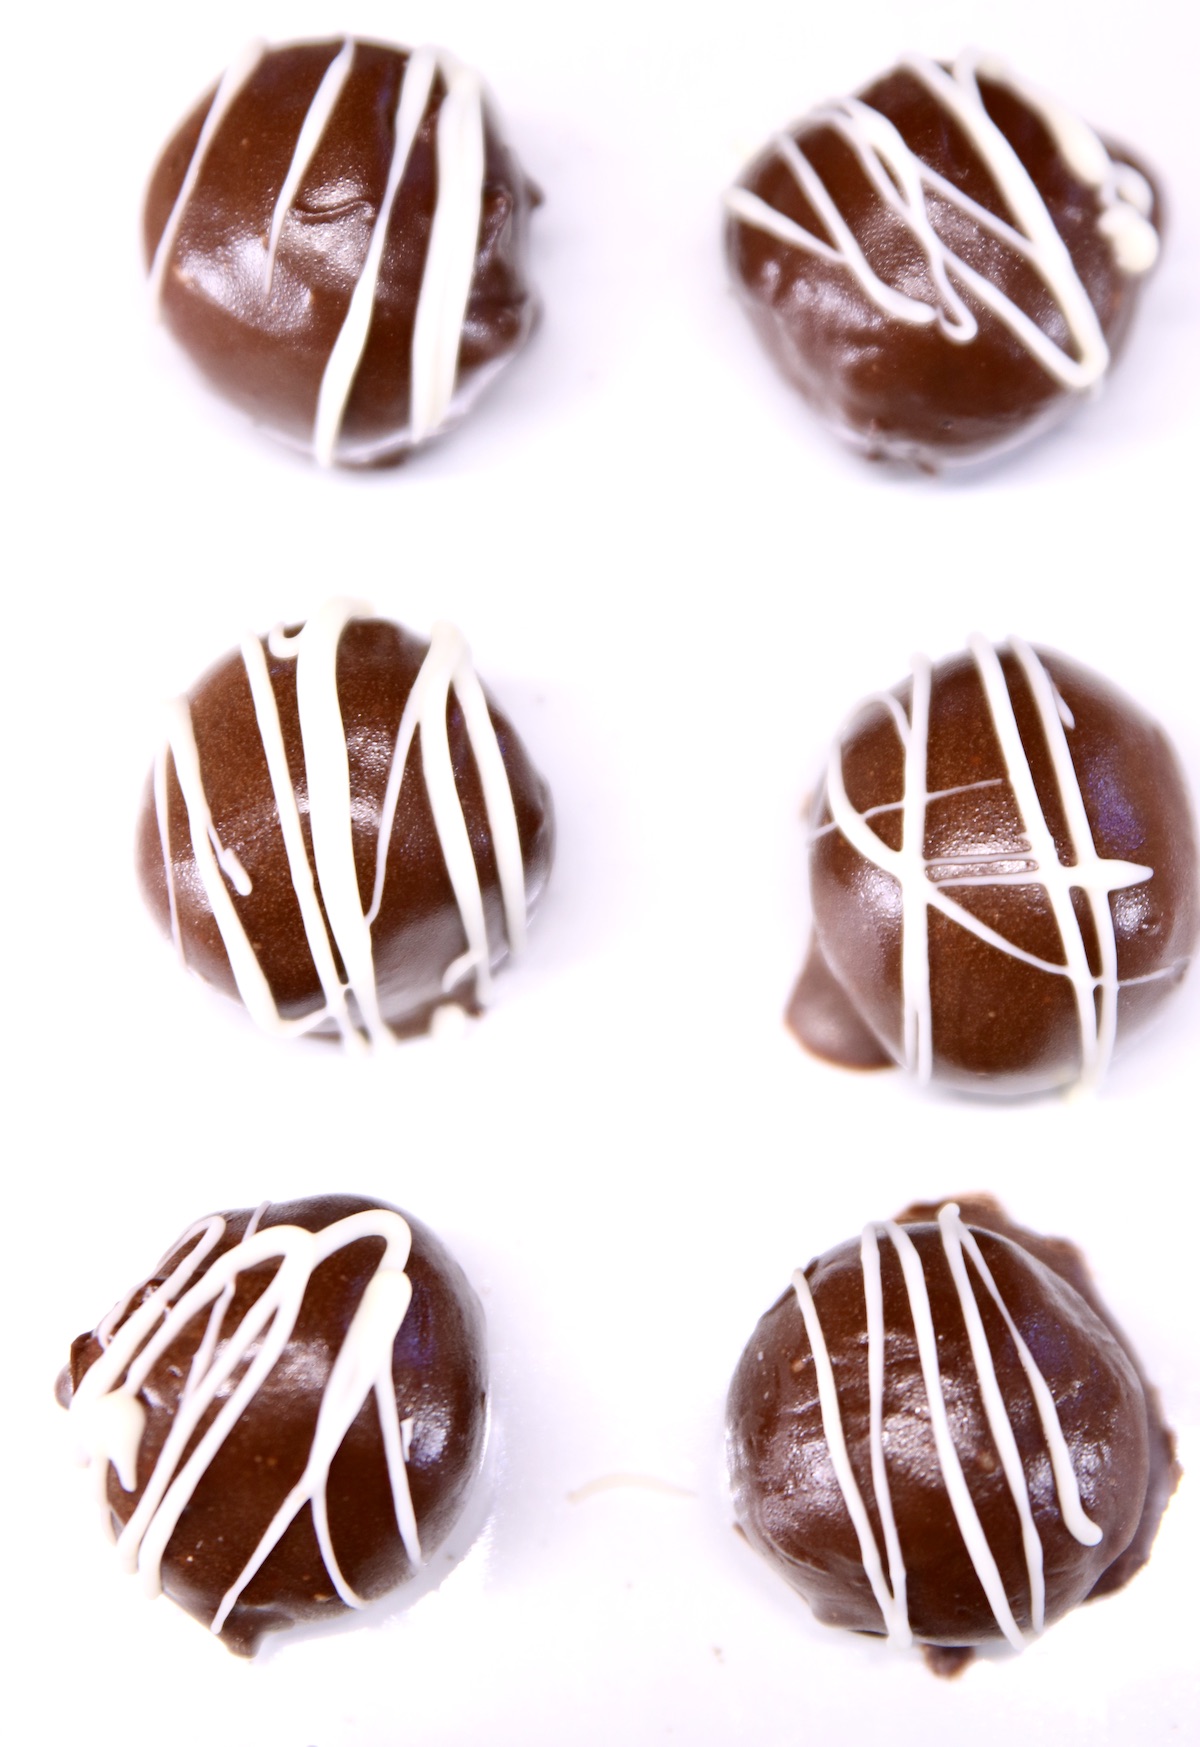 Peanut Butter balls on a white tray - overhead